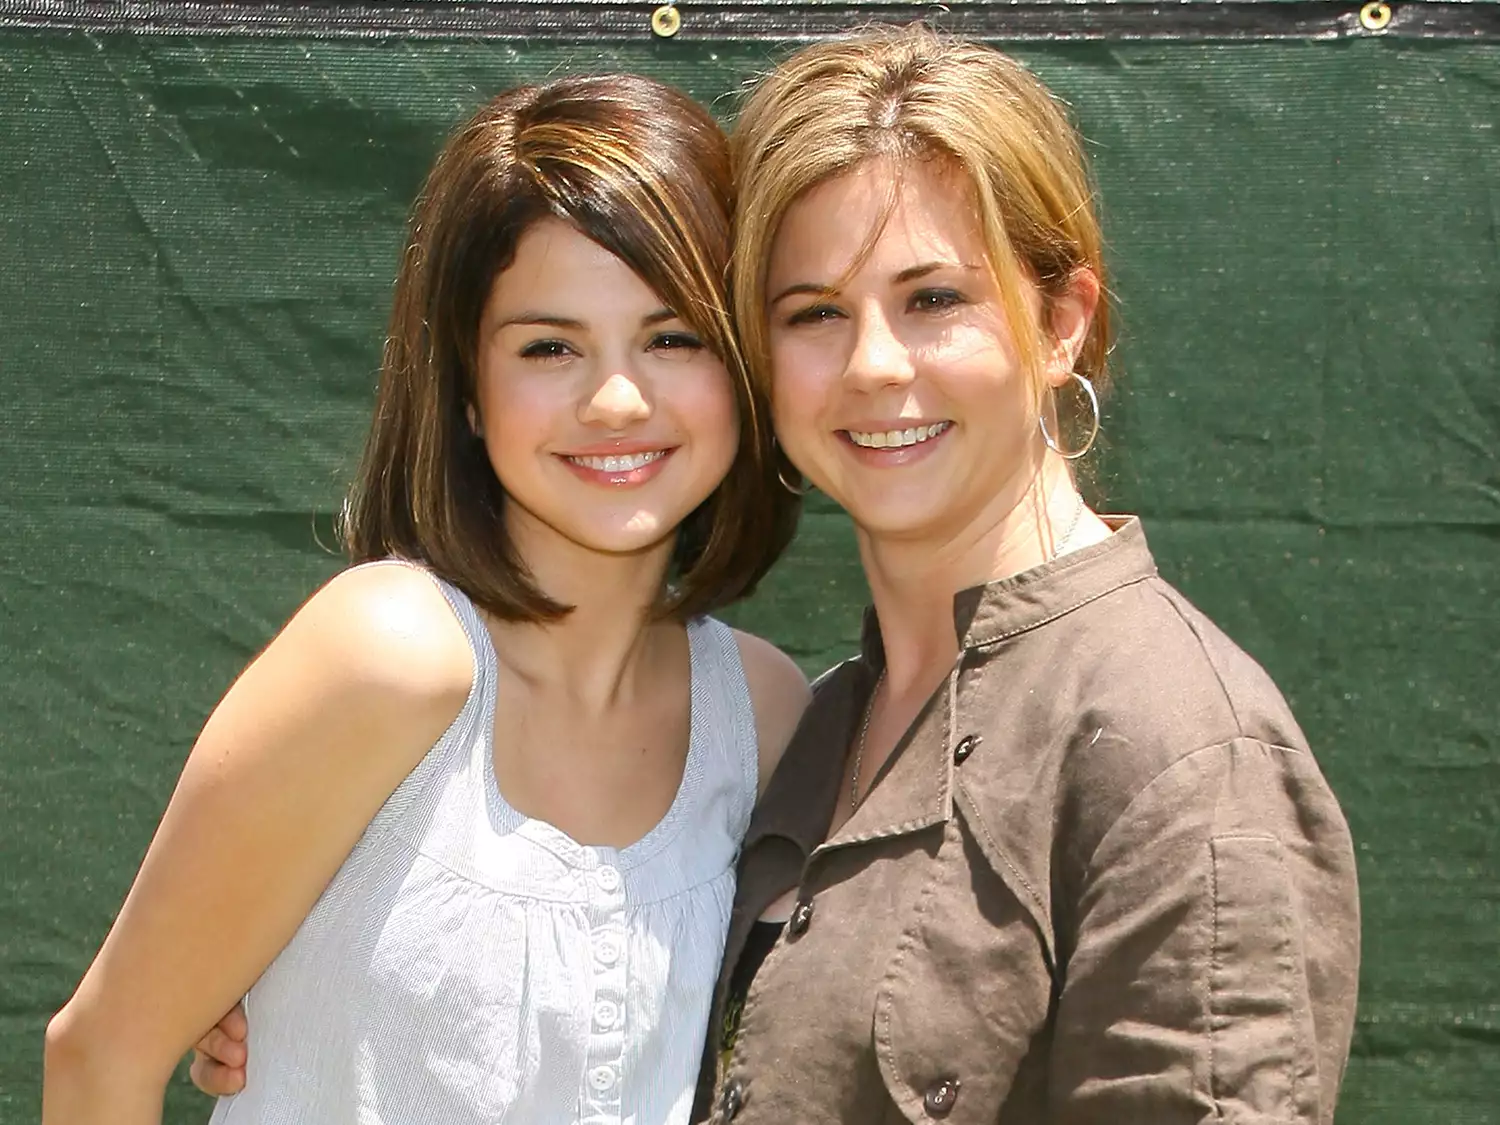 Selena Gomez (L) and her mom Mandy Cornett arrive to the 20th Annual "A Time for Heroes" Celebrity Carnival